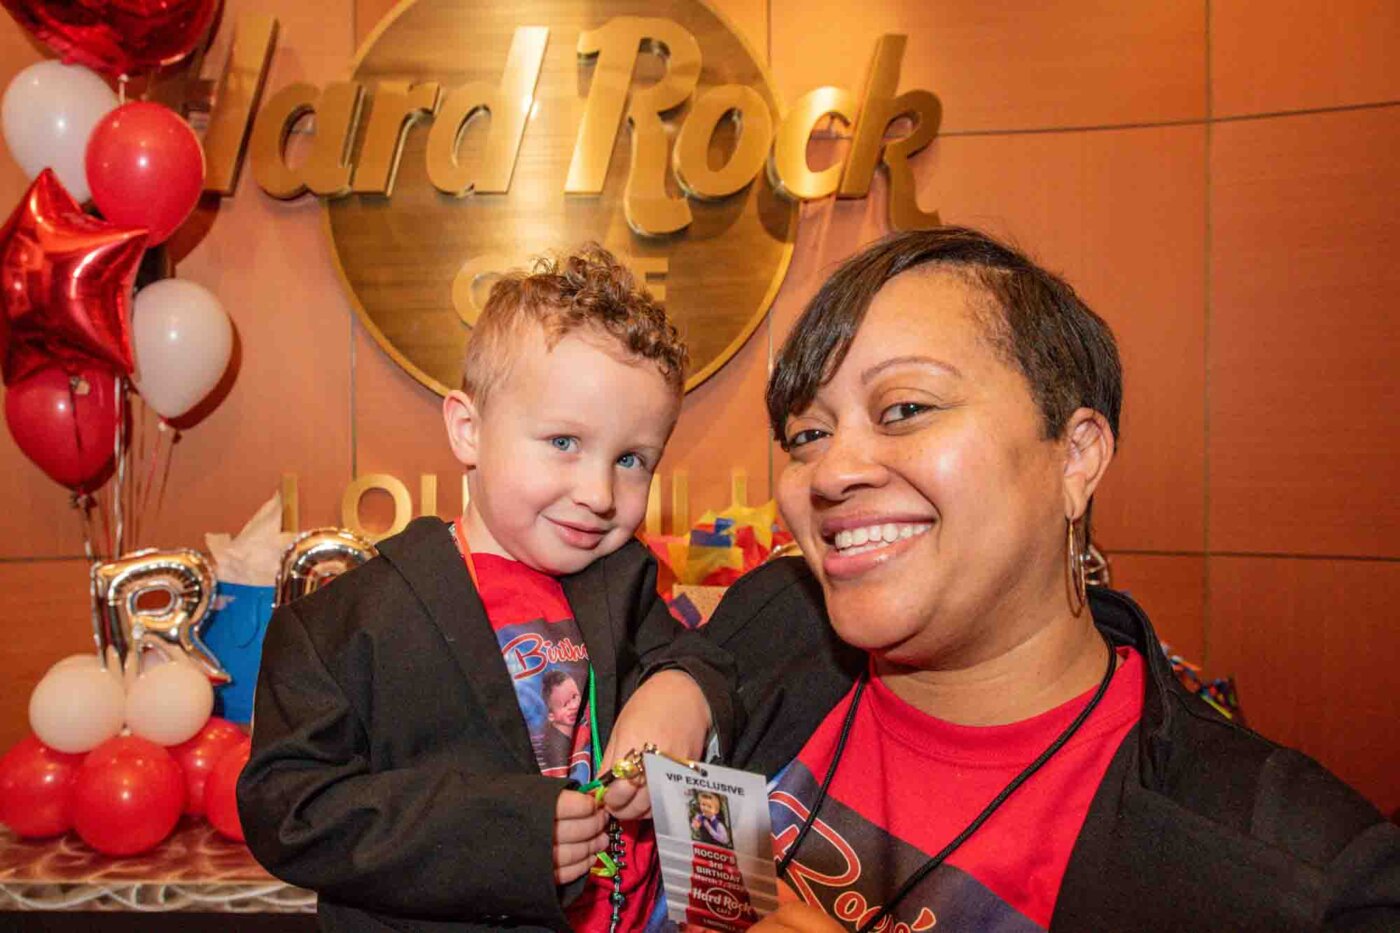 Family photos for Rocco’s third birthday party at the Muhammad Ali Center and then at the Hard Rock Cafe in Fourth Street Live! Saturday, March 7, 2020, in Louisville, Ky. (Photo by Brian Bohannon)